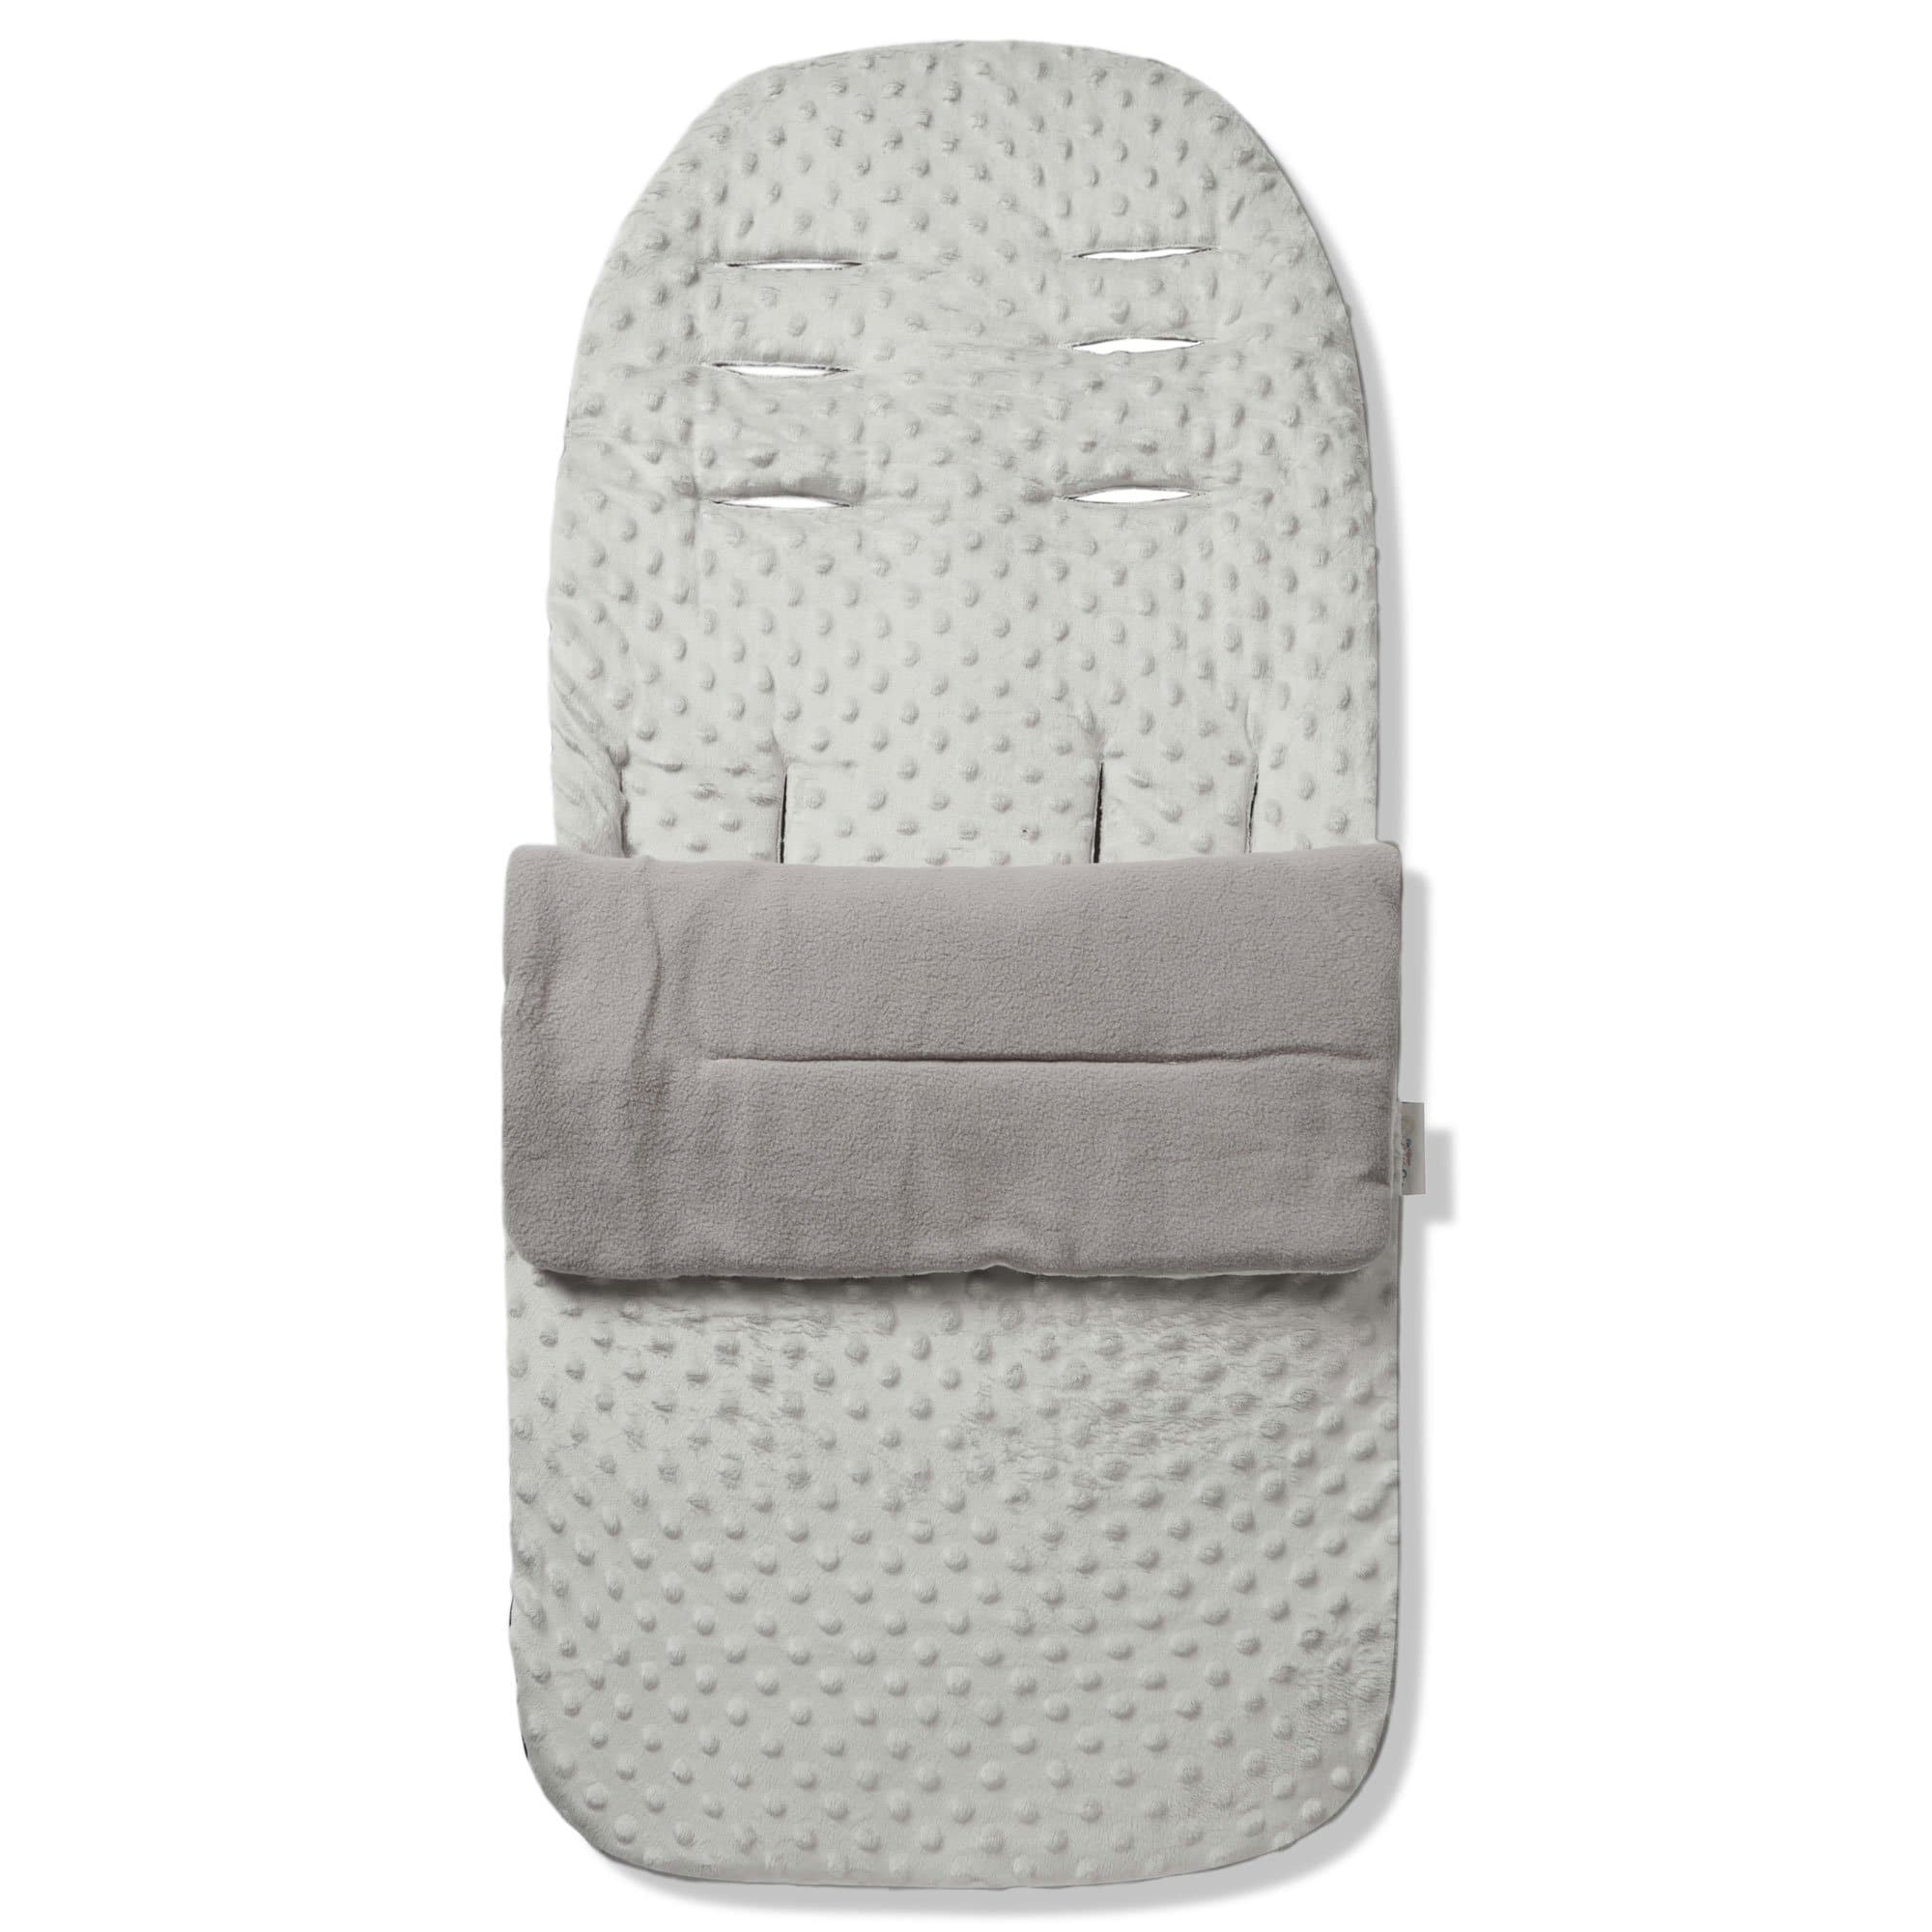 Dimple Footmuff / Cosy Toes Compatible with Looping - Grey / Fits All Models | For Your Little One